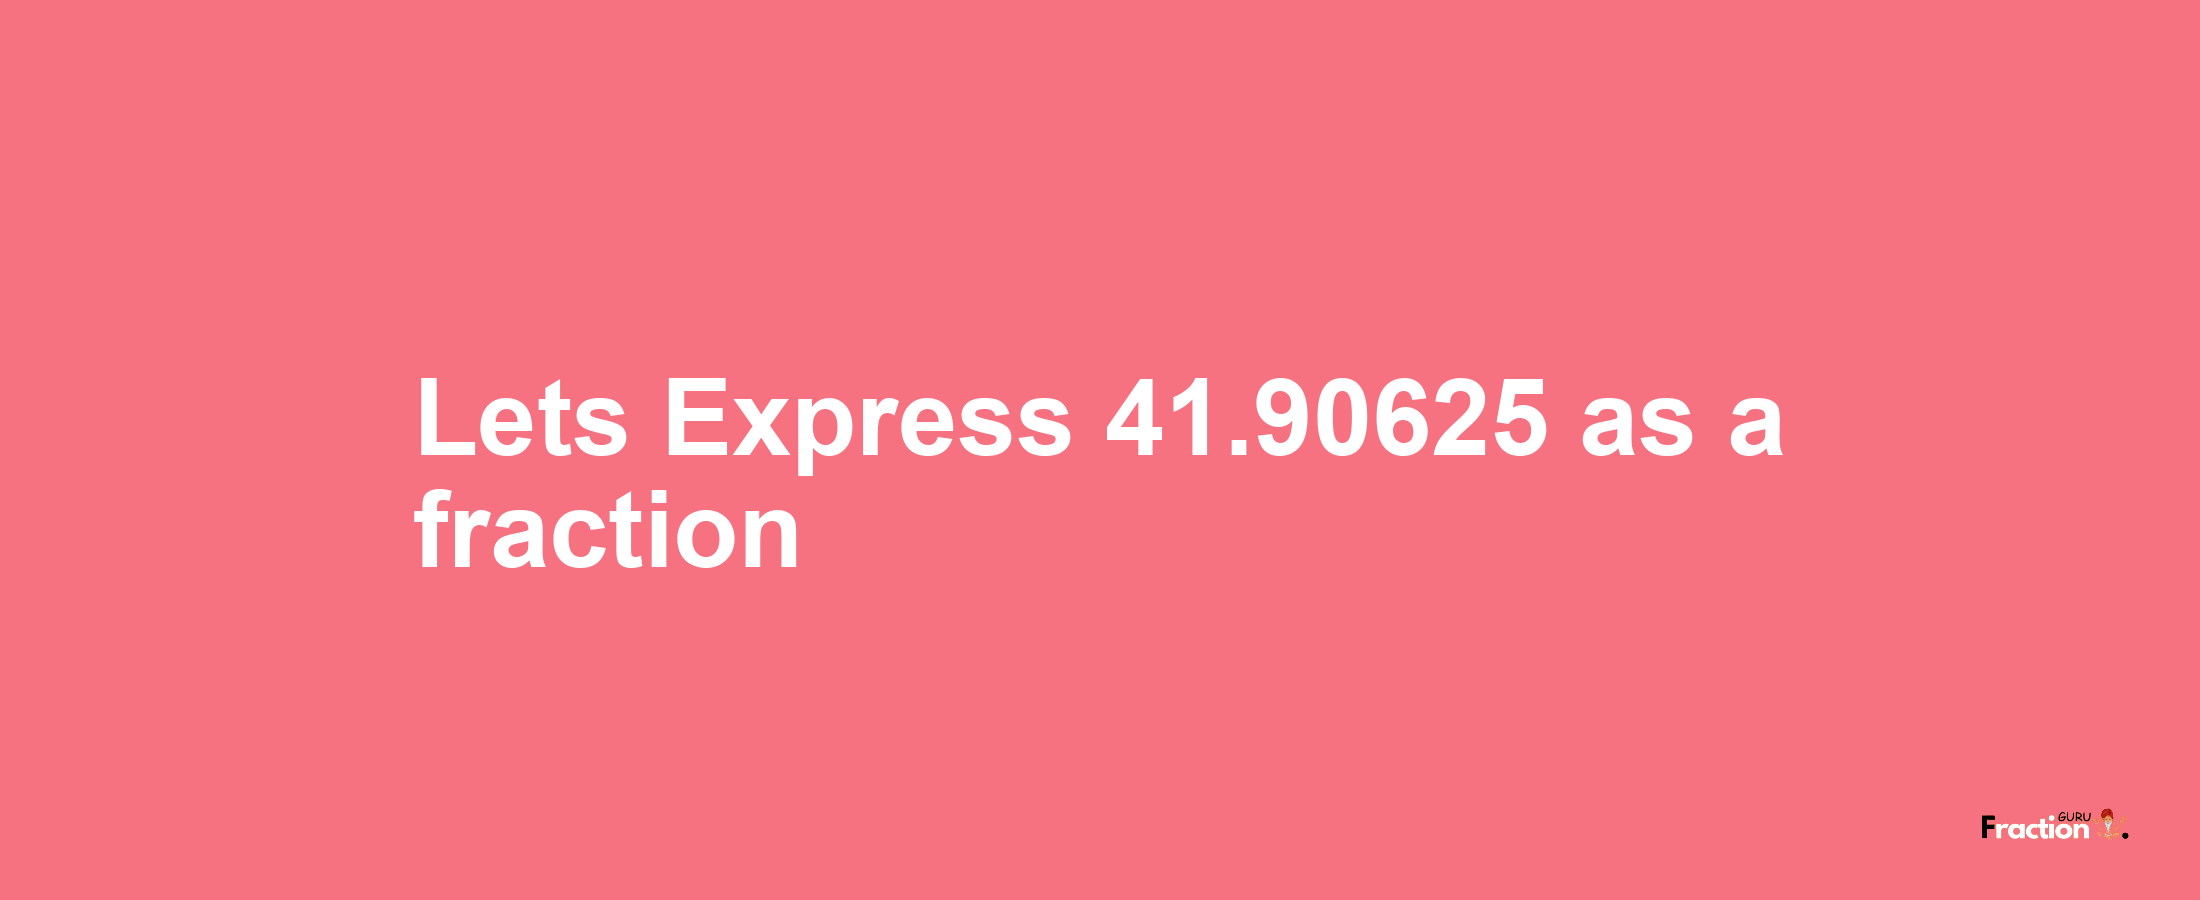 Lets Express 41.90625 as afraction